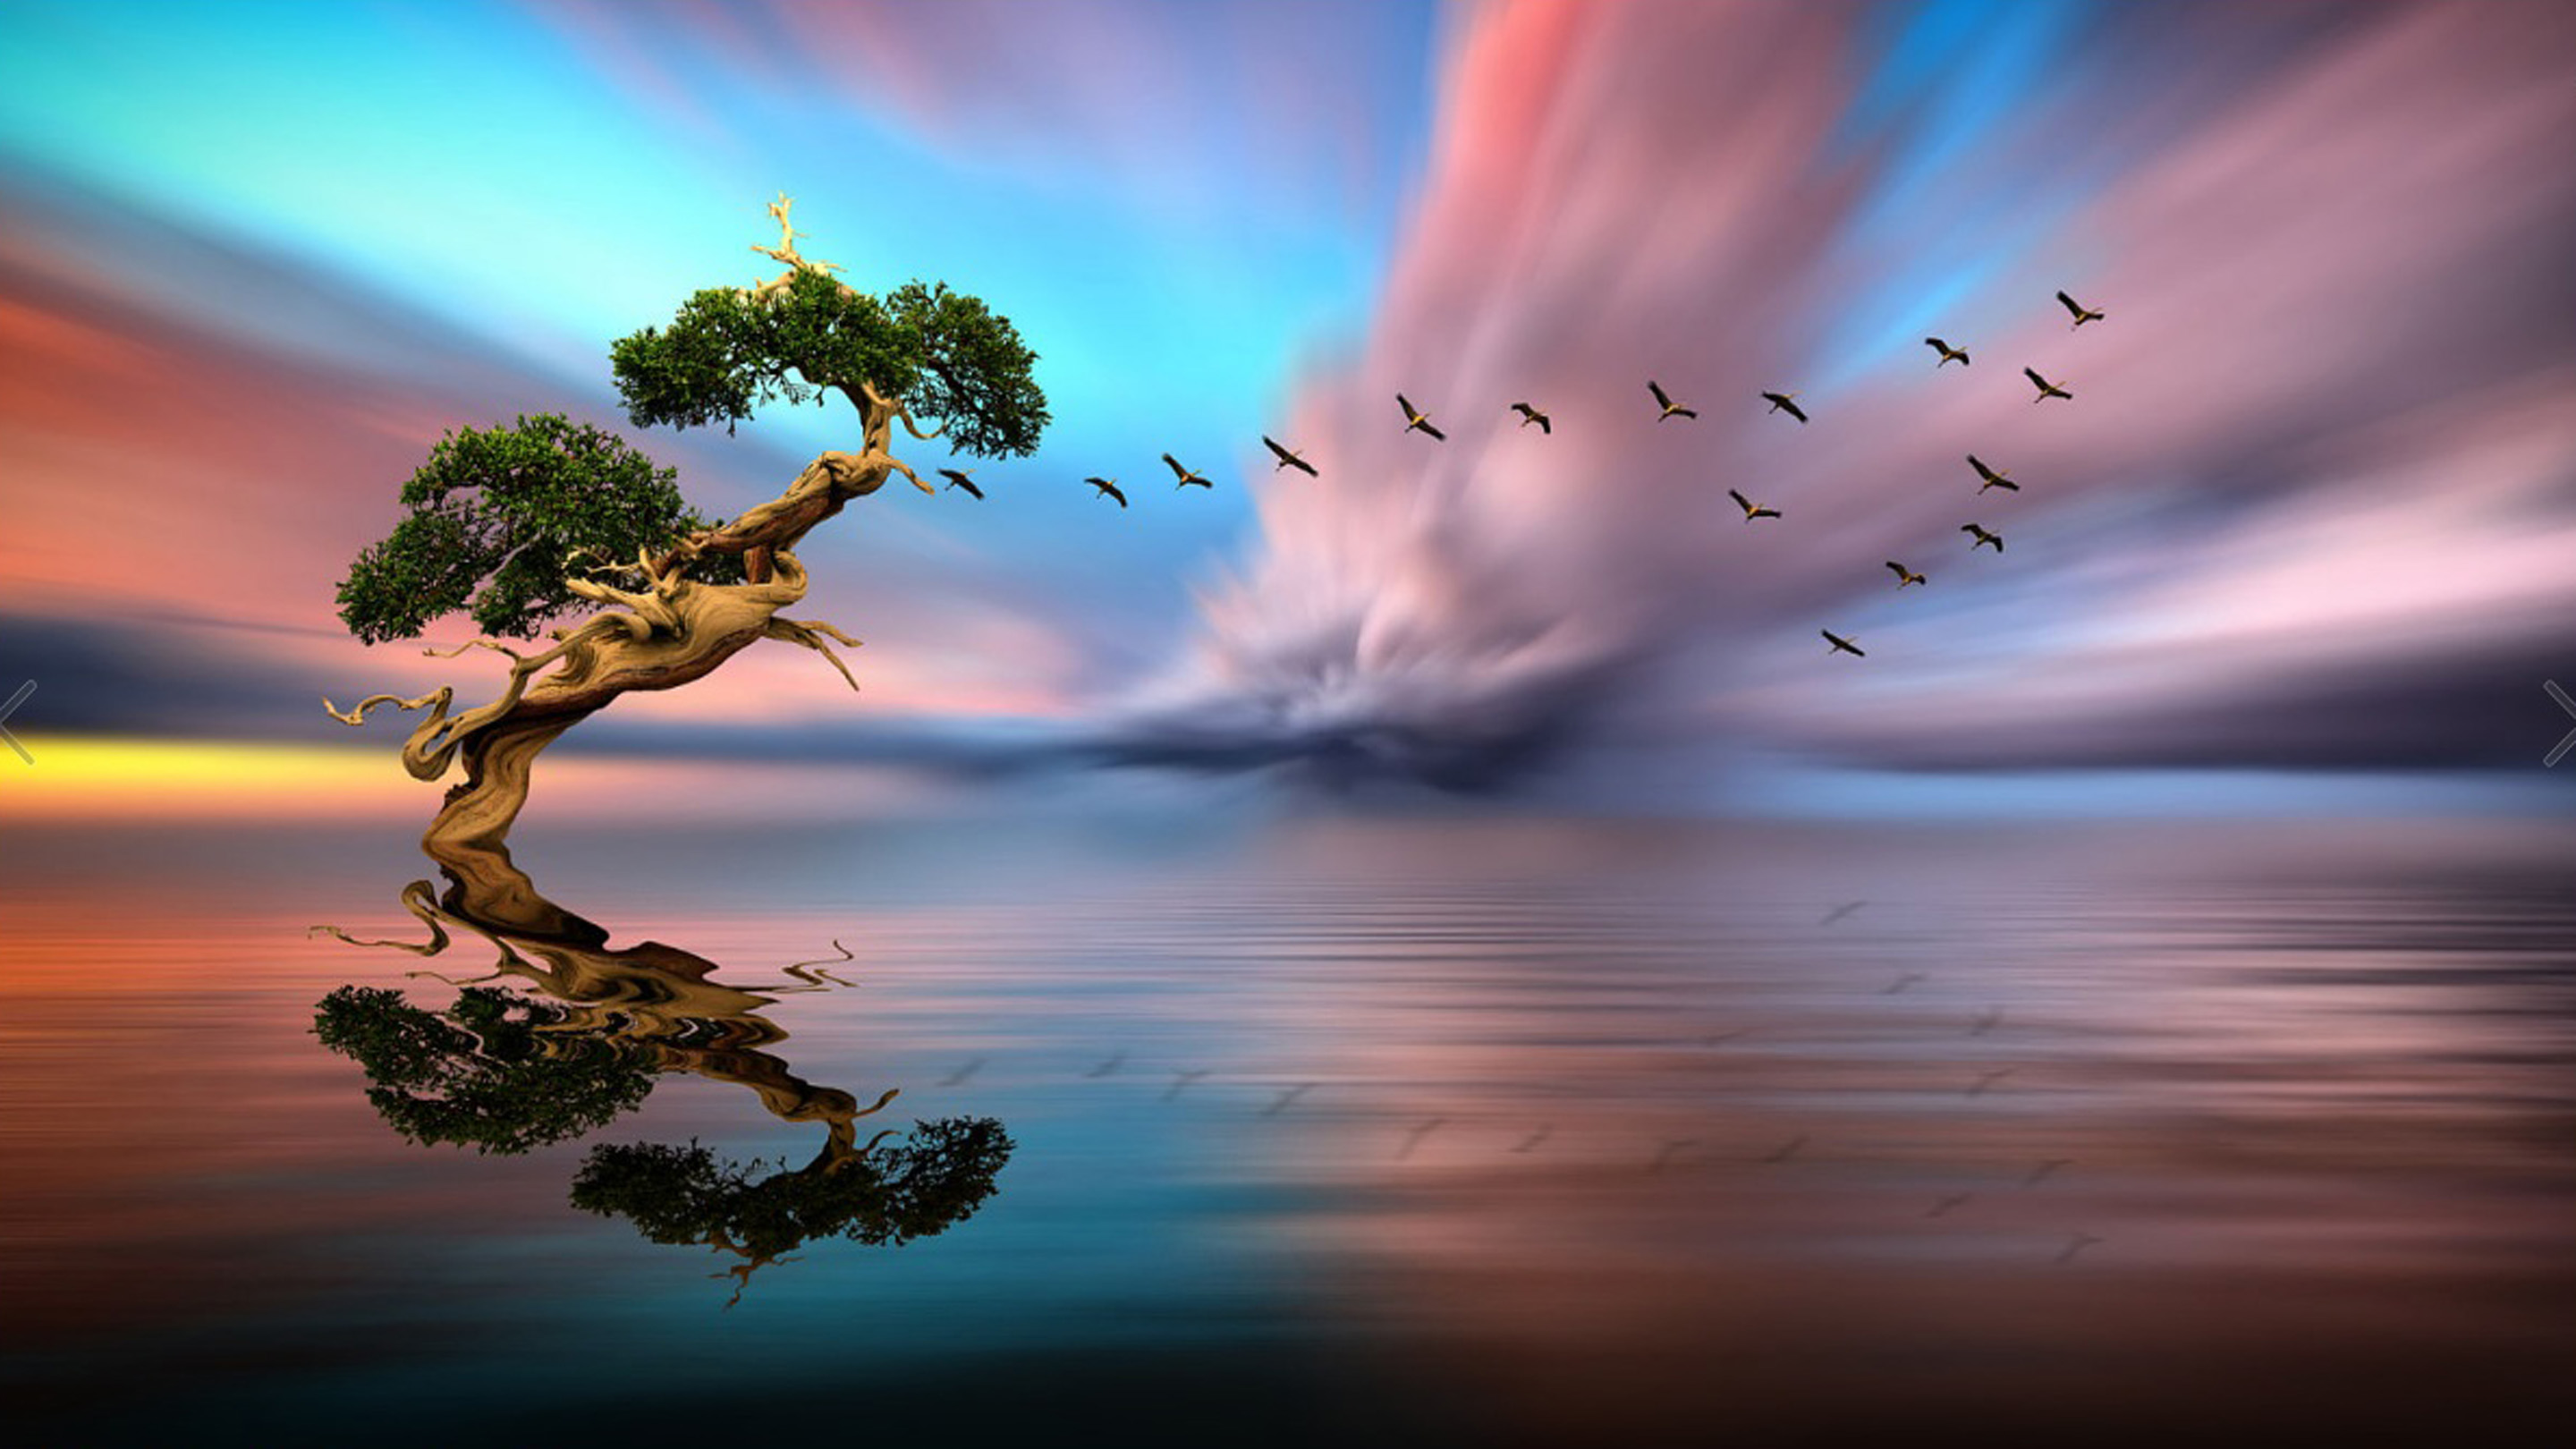 Solitary Tree Lake Birds In Flight Red Cloud Sunset, Reflection In